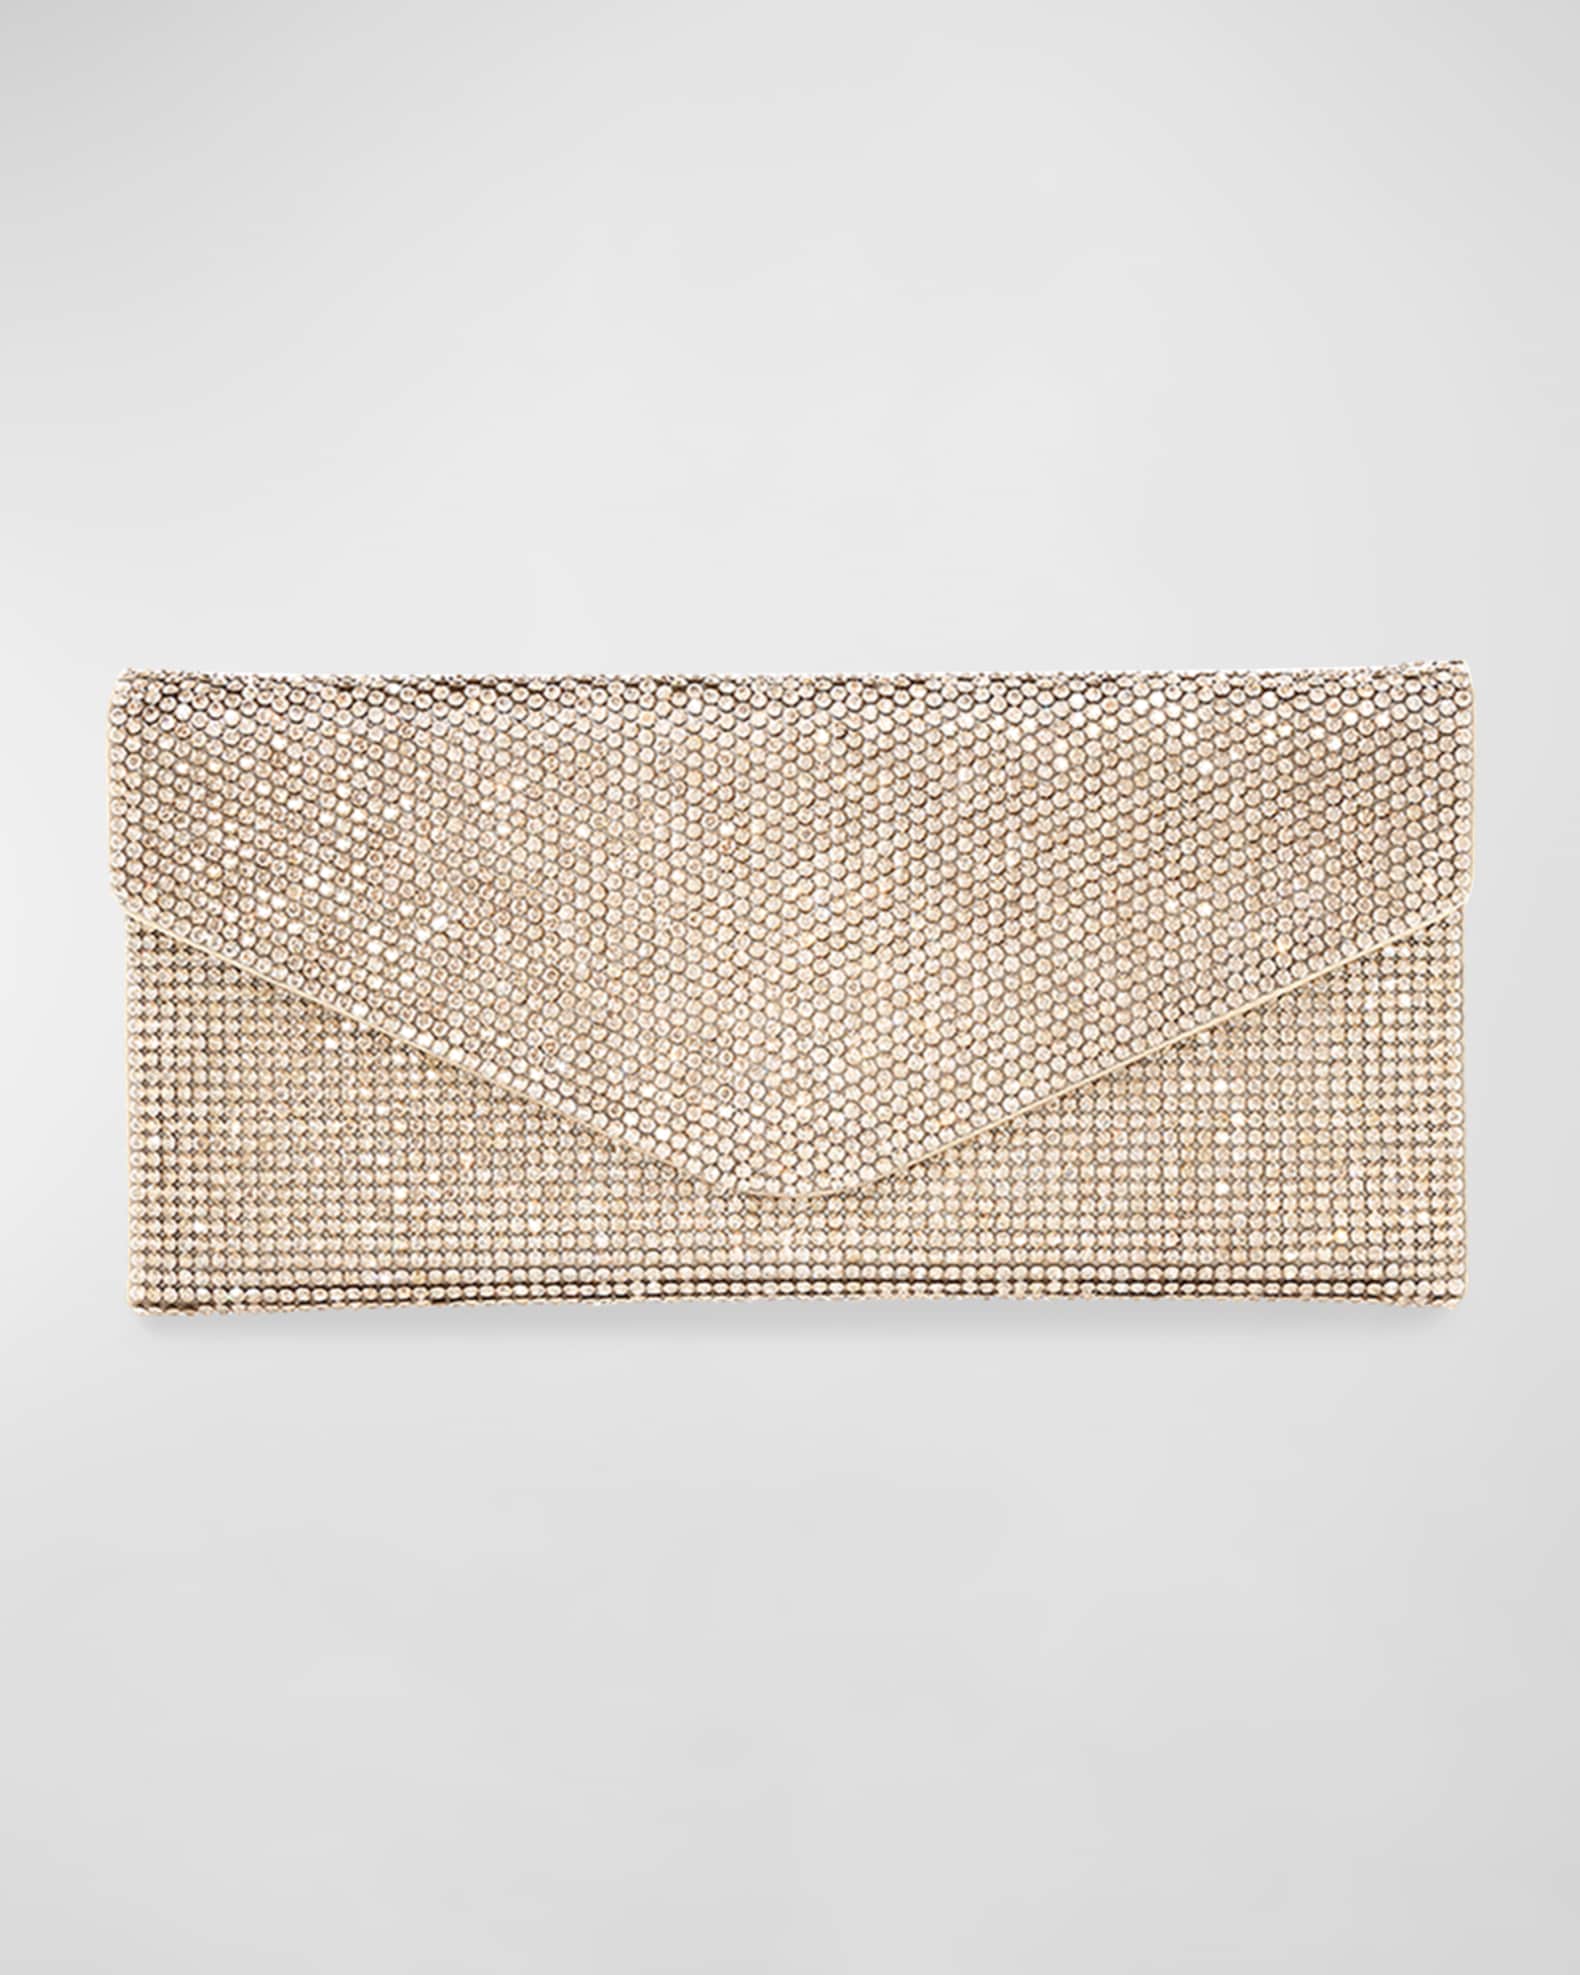 Judith Leiber Couture Envelope Beaded Clutch Bag | Neiman Marcus